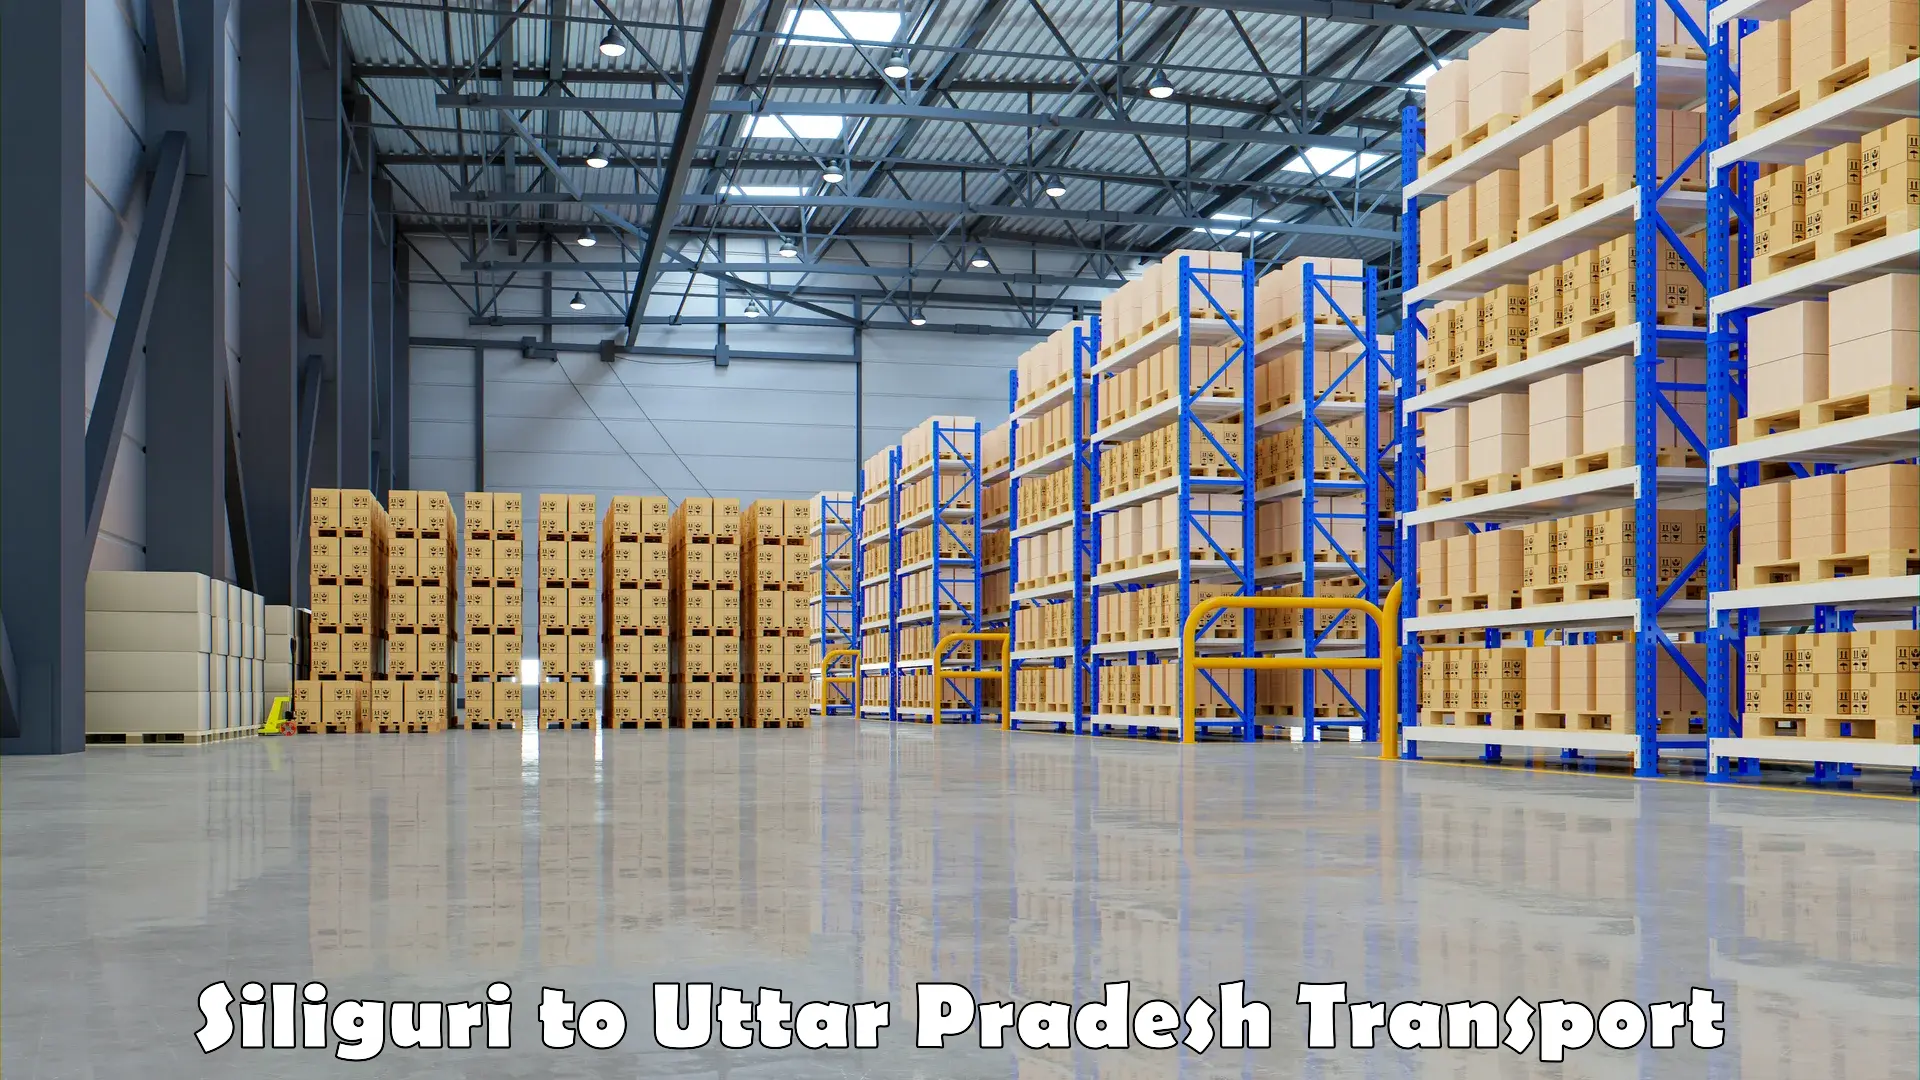 Daily parcel service transport Siliguri to Bareilly